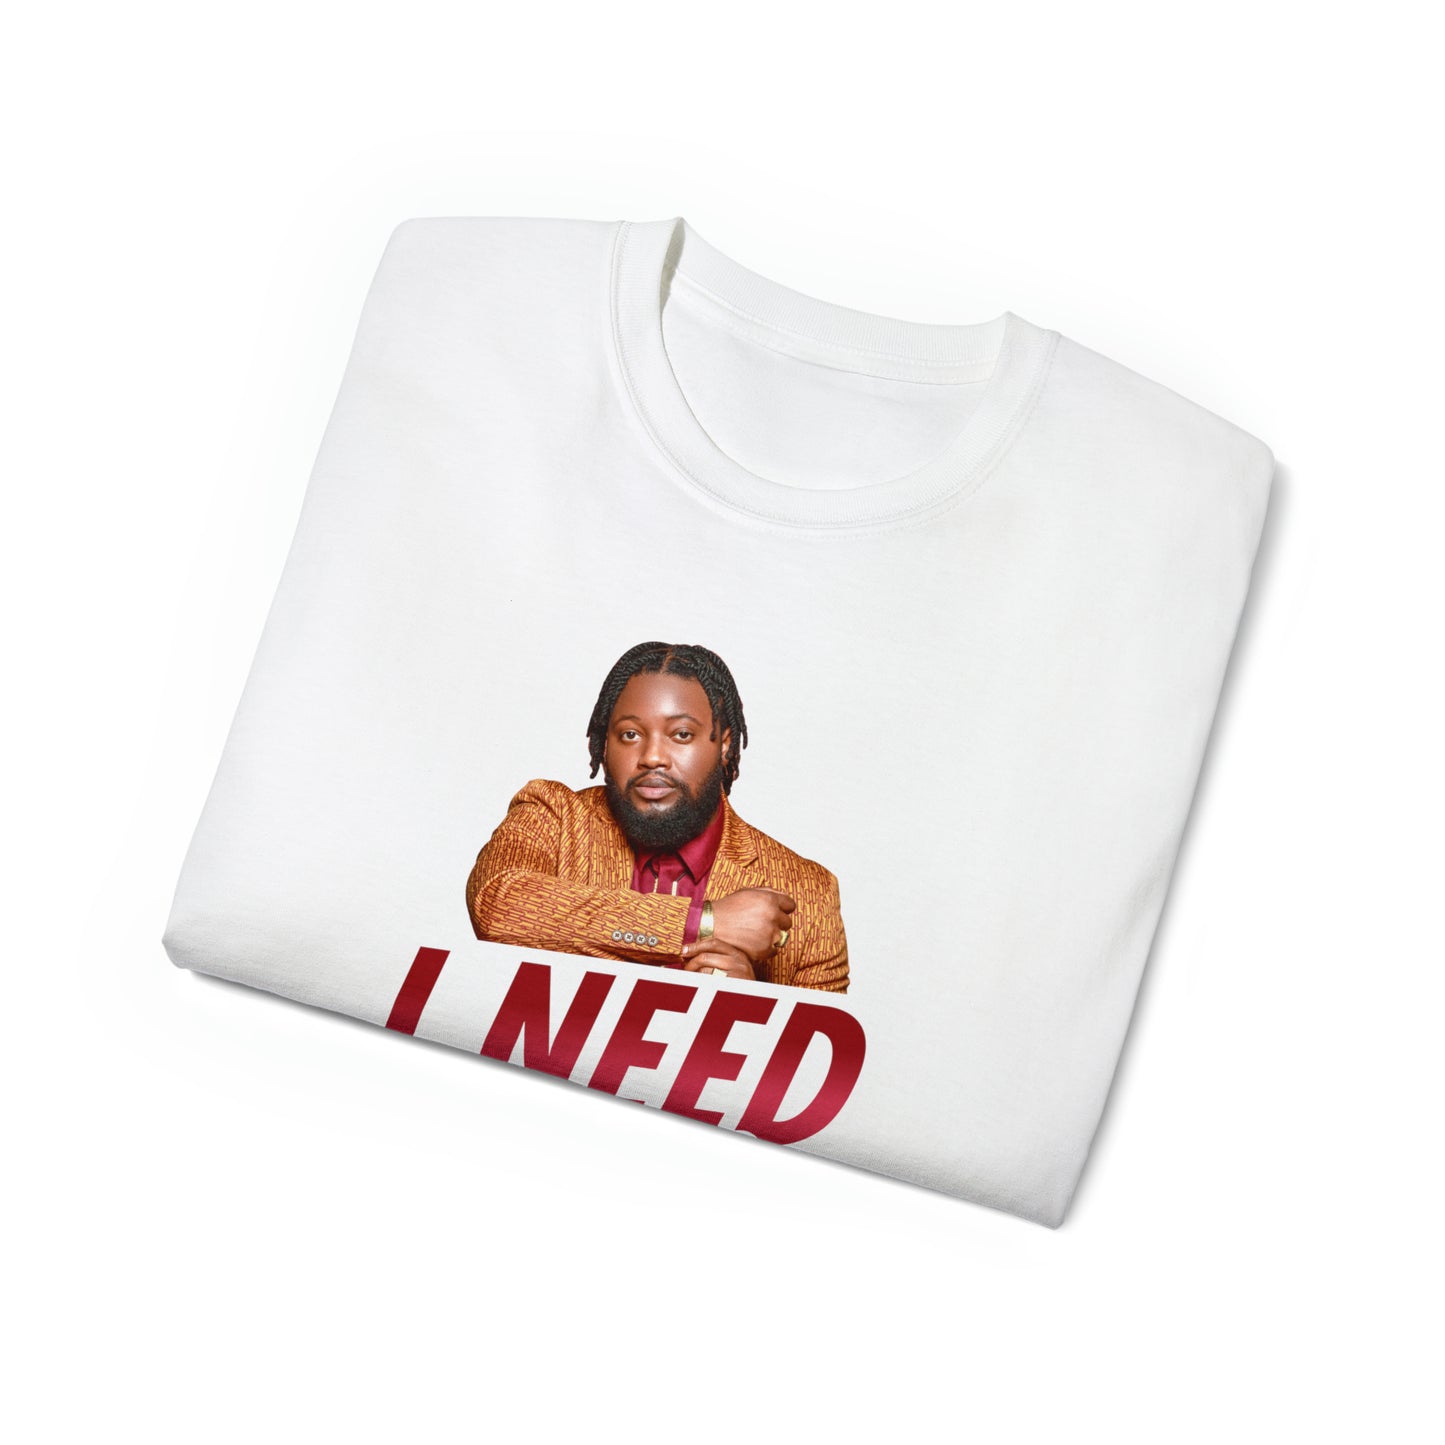 "I Need Your Grace" Cover Graphic T-Shirt